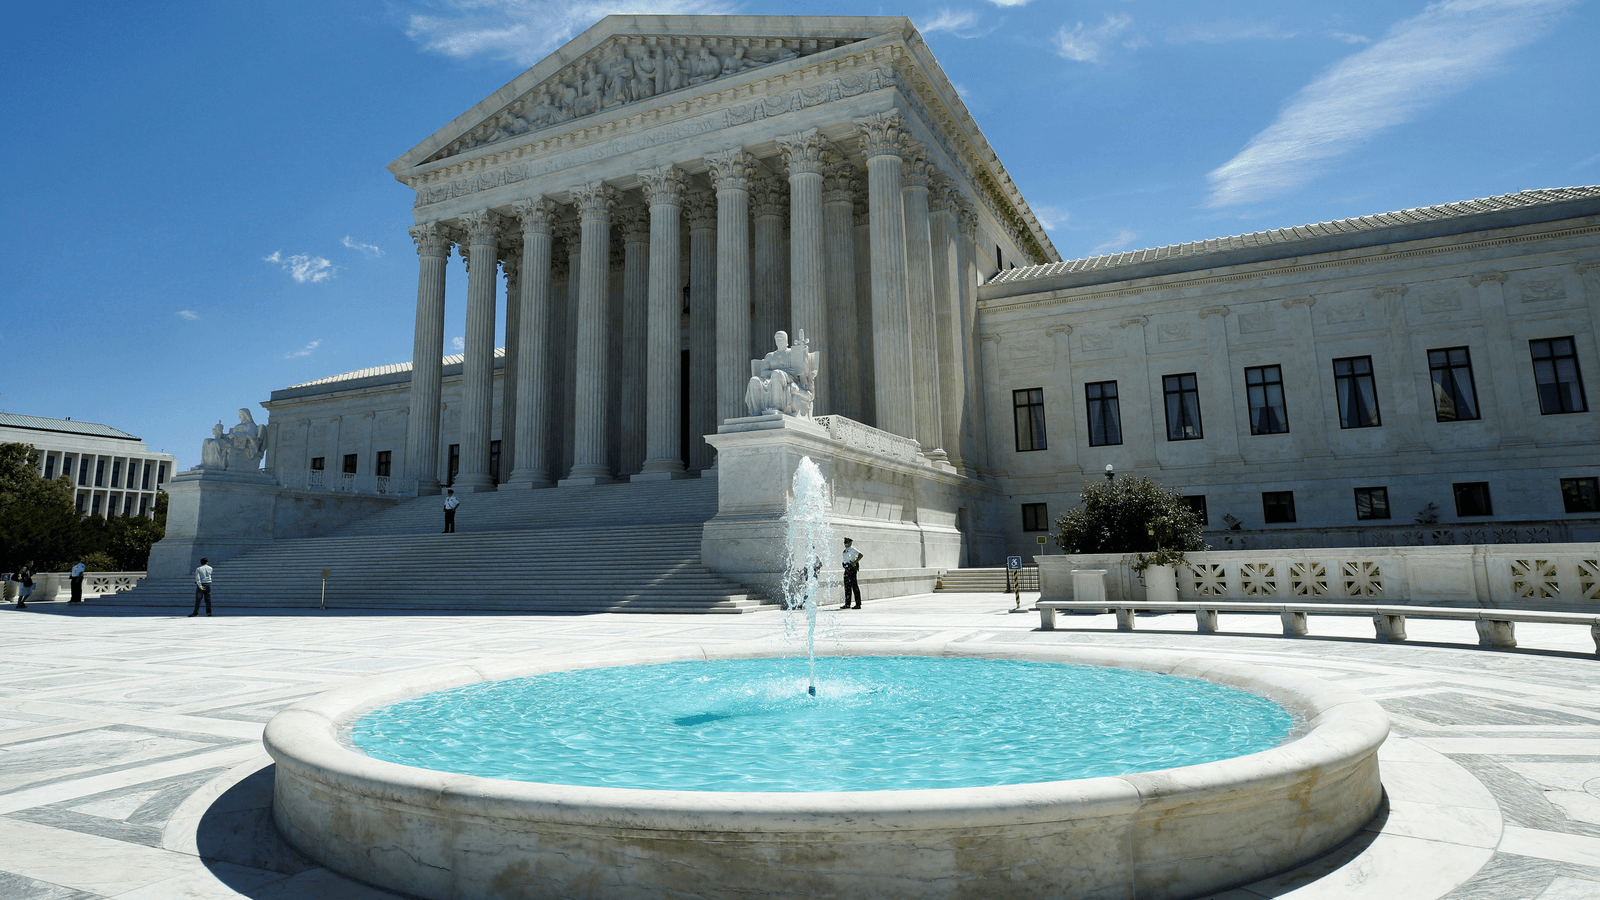 The building of the US Supreme Court is seen in Washington, DC, June 26, 2017. A recent study shows that three-forths of respondents back a constitutional amendment outlawing the Citizens United decision.